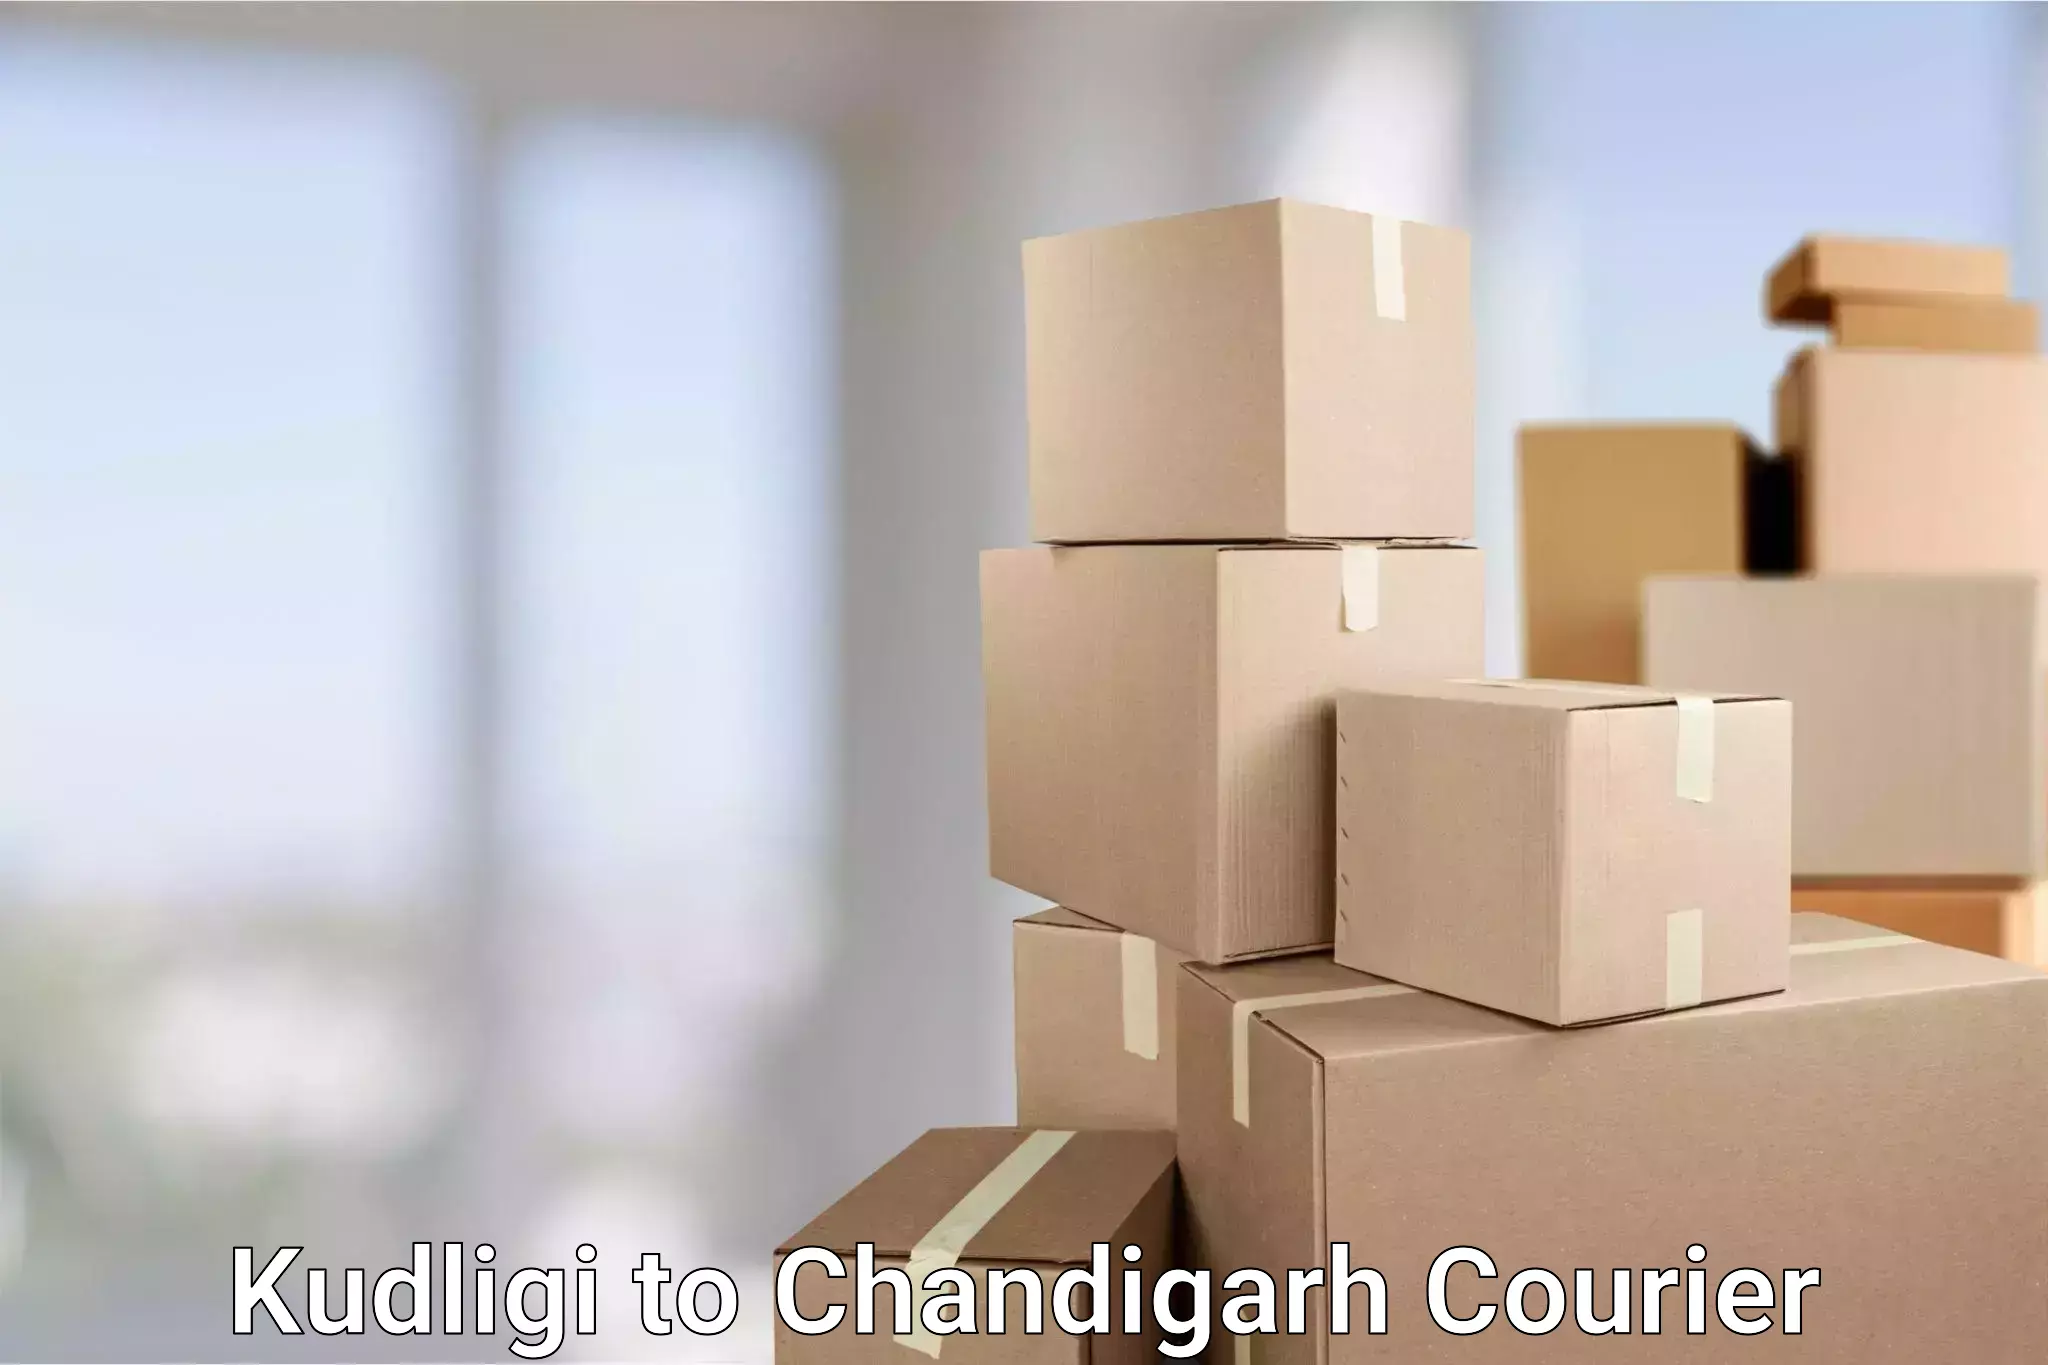 High-quality delivery services Kudligi to Chandigarh